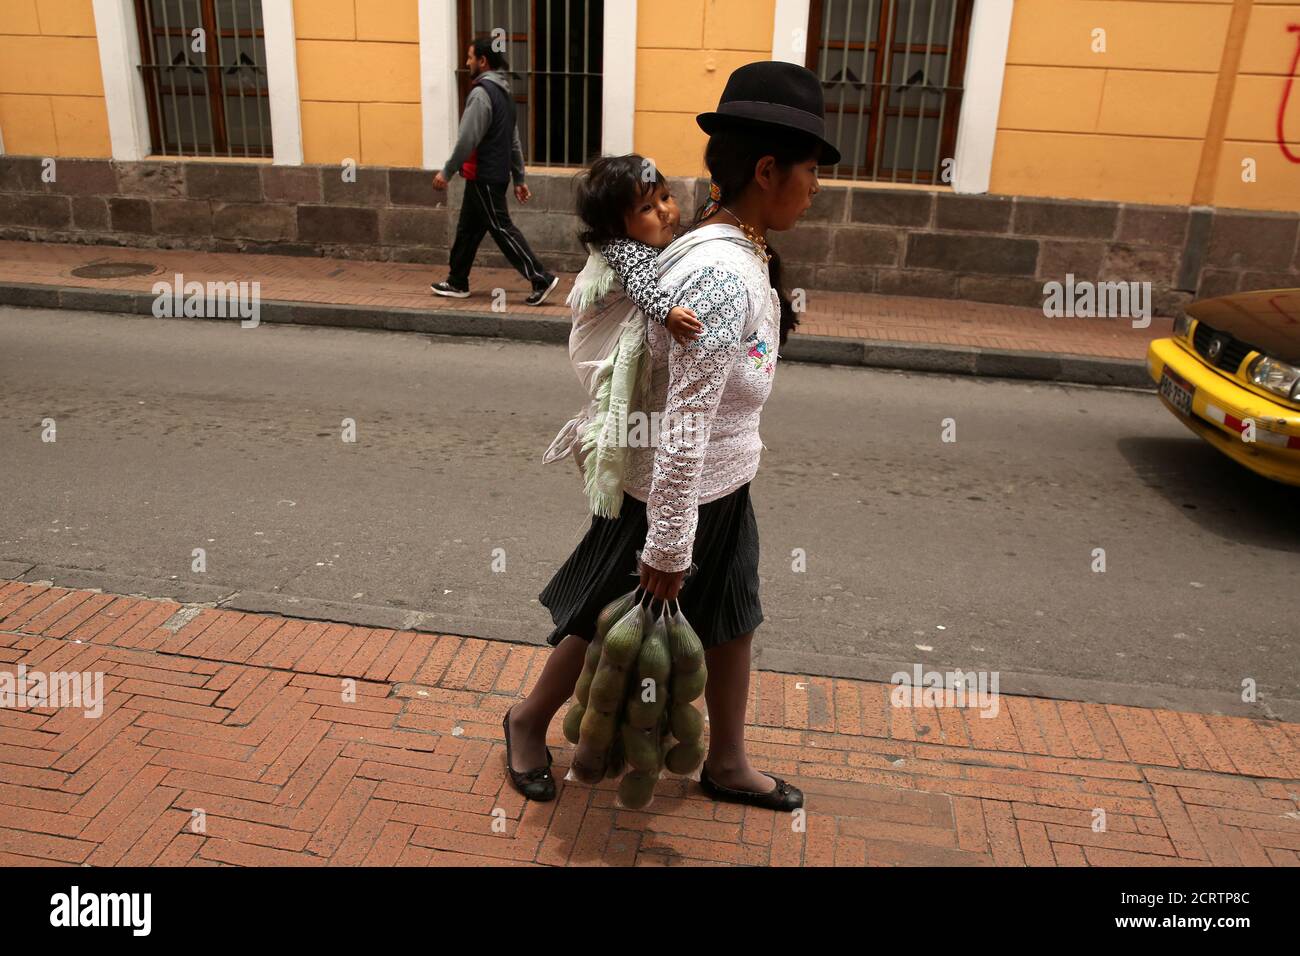 A woman carrying a baby sells avocados in downtown Quito, Ecuador March 30, 2017. REUTERS/Mariana Bazo Stock Photo